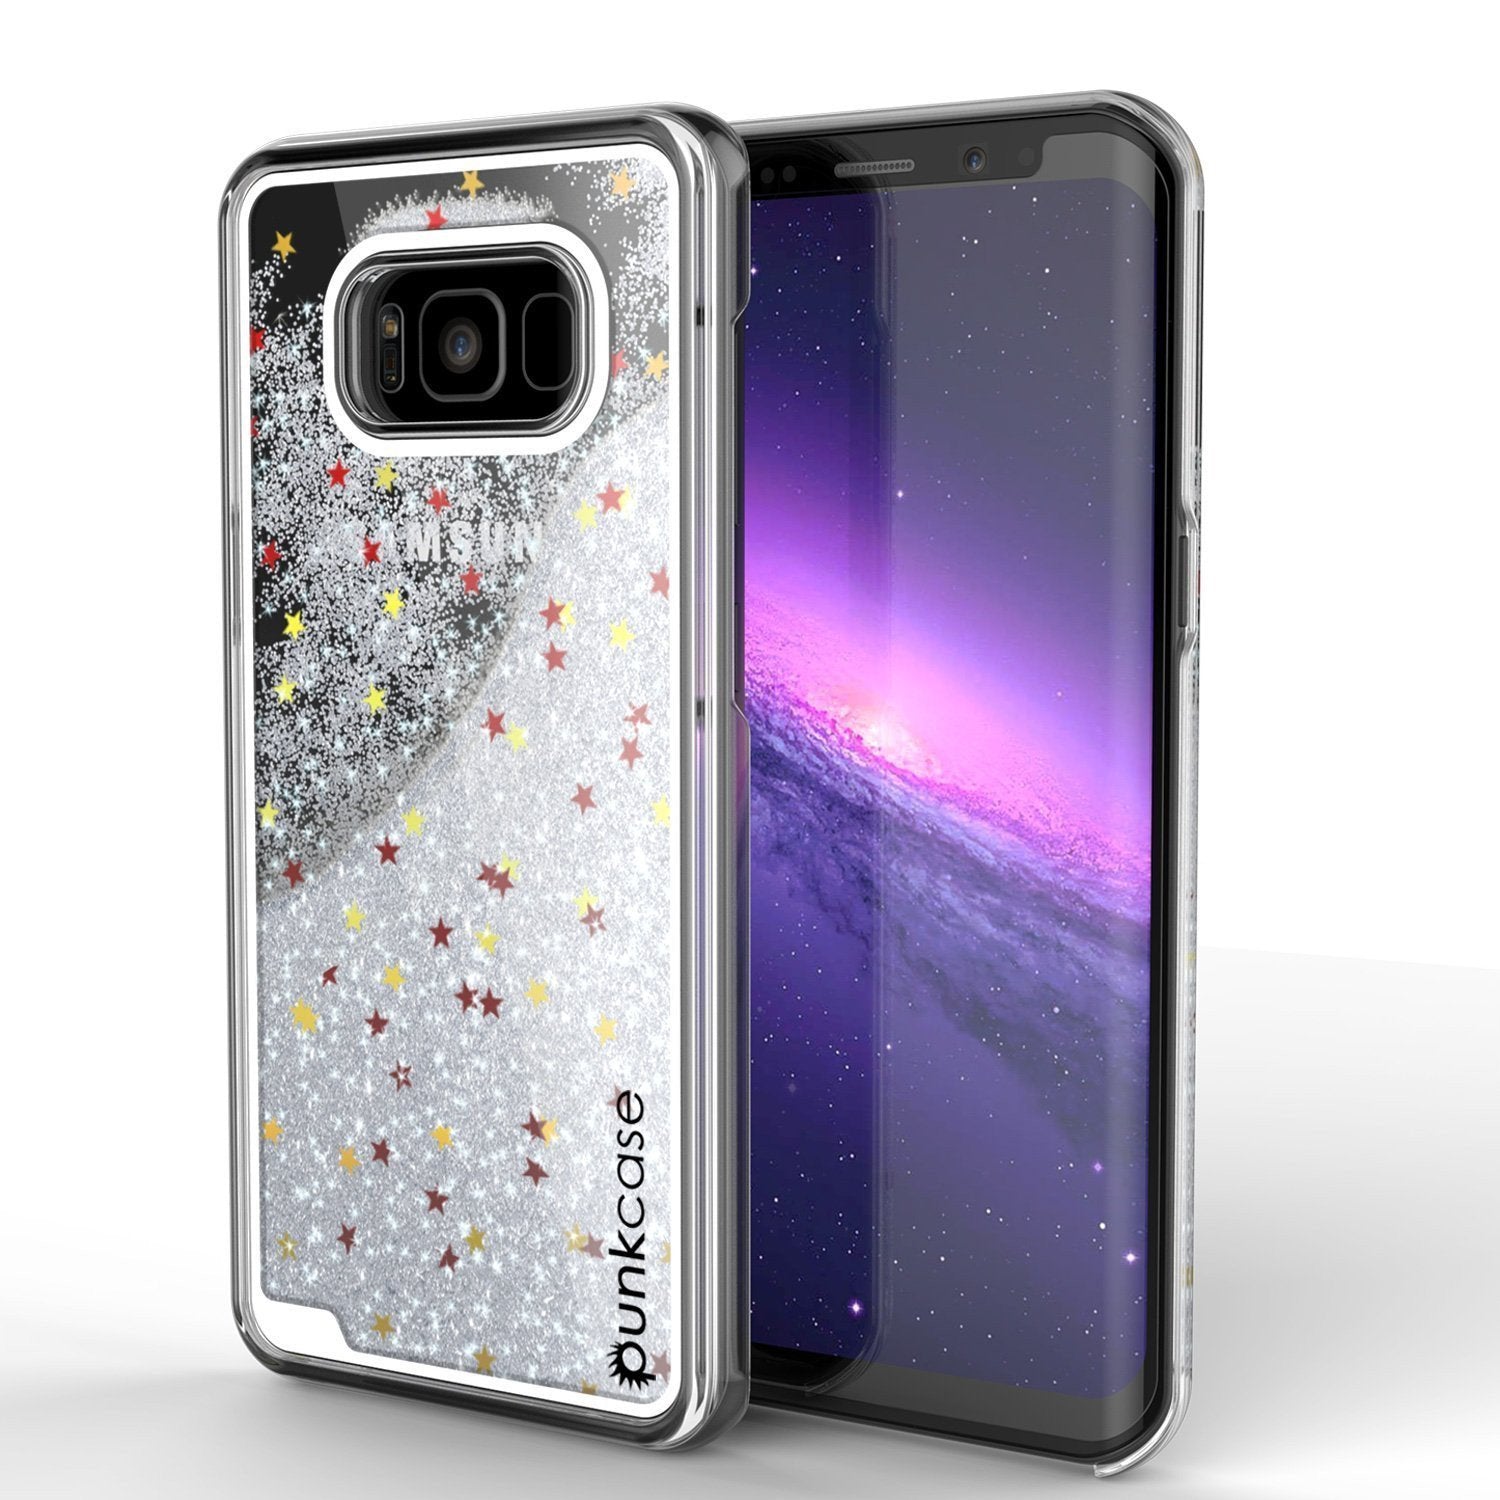 S8 Plus Case, Punkcase [Liquid Series] Protective Dual Layer Floating Glitter Cover with lots of Bling & Sparkle + PunkShield Screen Protector for Samsungs Galaxy S8+ [Silver] - PunkCase NZ